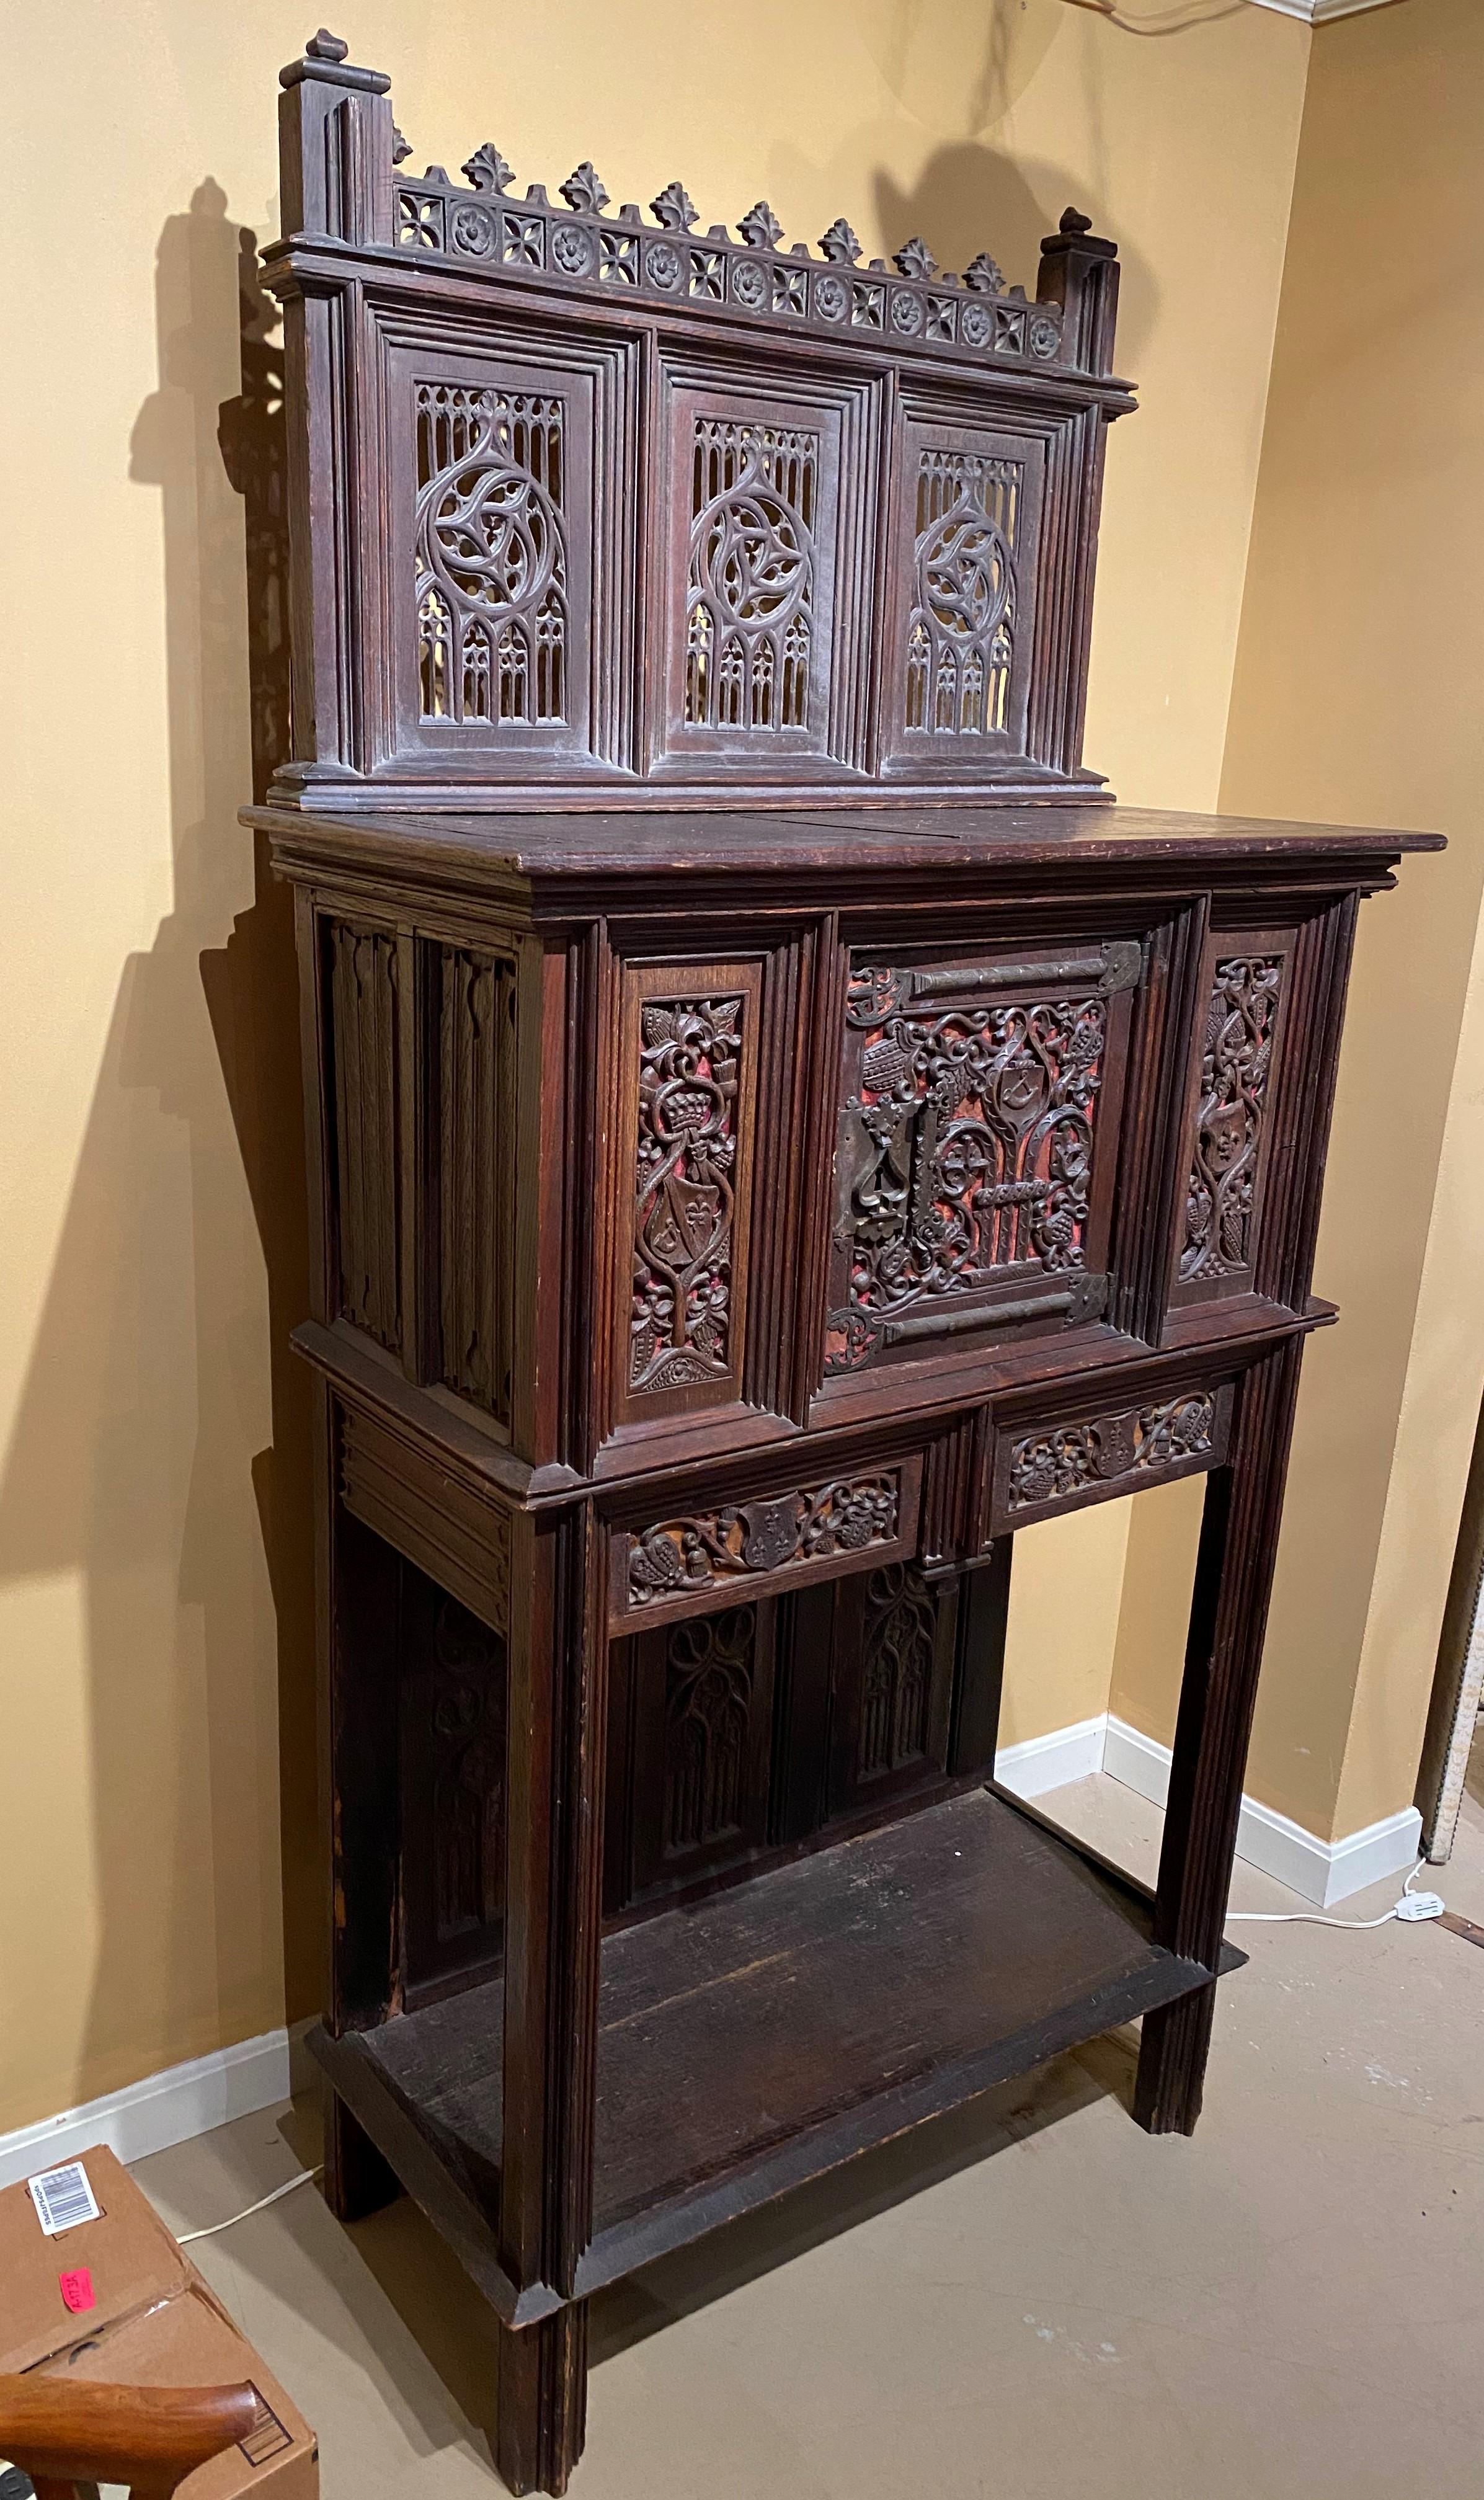 A fine form two-piece oak Gothic style cabinet in old dark finish with trefoil lined crest surmounting an upper tracery gallery back, over a single door cabinet, the center panel adorned with large decorative metal hinges and reticulated carved